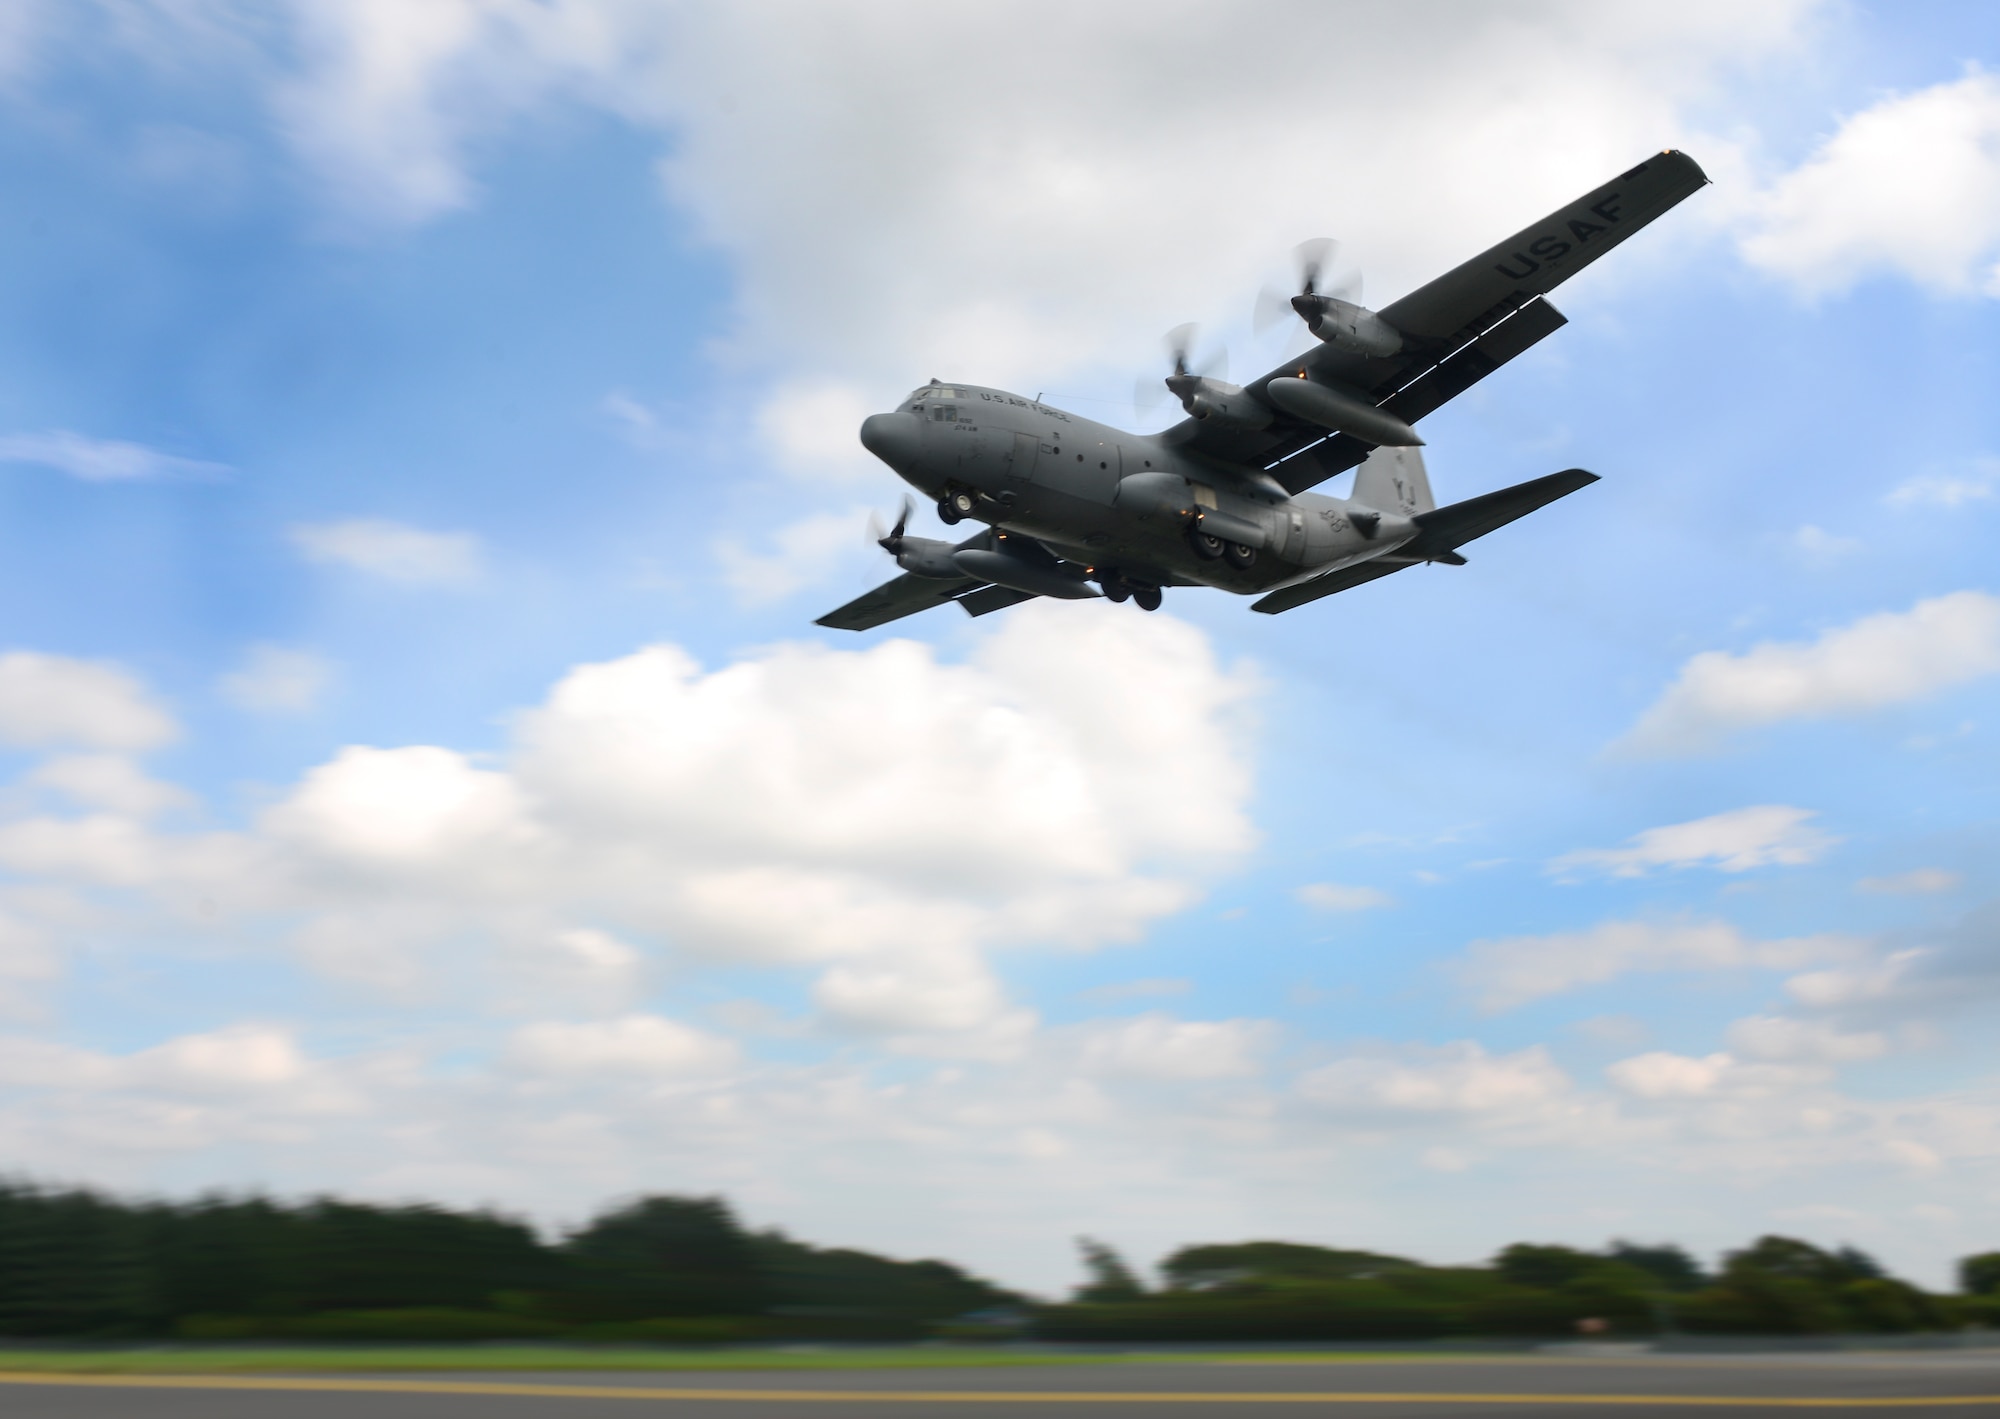 A C-130 Hercules assigned to the 36th Airlift Squadron comes in for a touch-and-go landing at Yokota Air Base, Japan, Sep. 7, 2016. Yokota C-130s perform touch-and-goes regularly, allowing aircrew to practice take-offs and landings, sharpening their flight skills. (U.S. Air Force Photo by Airman 1st Class Baker/Released)